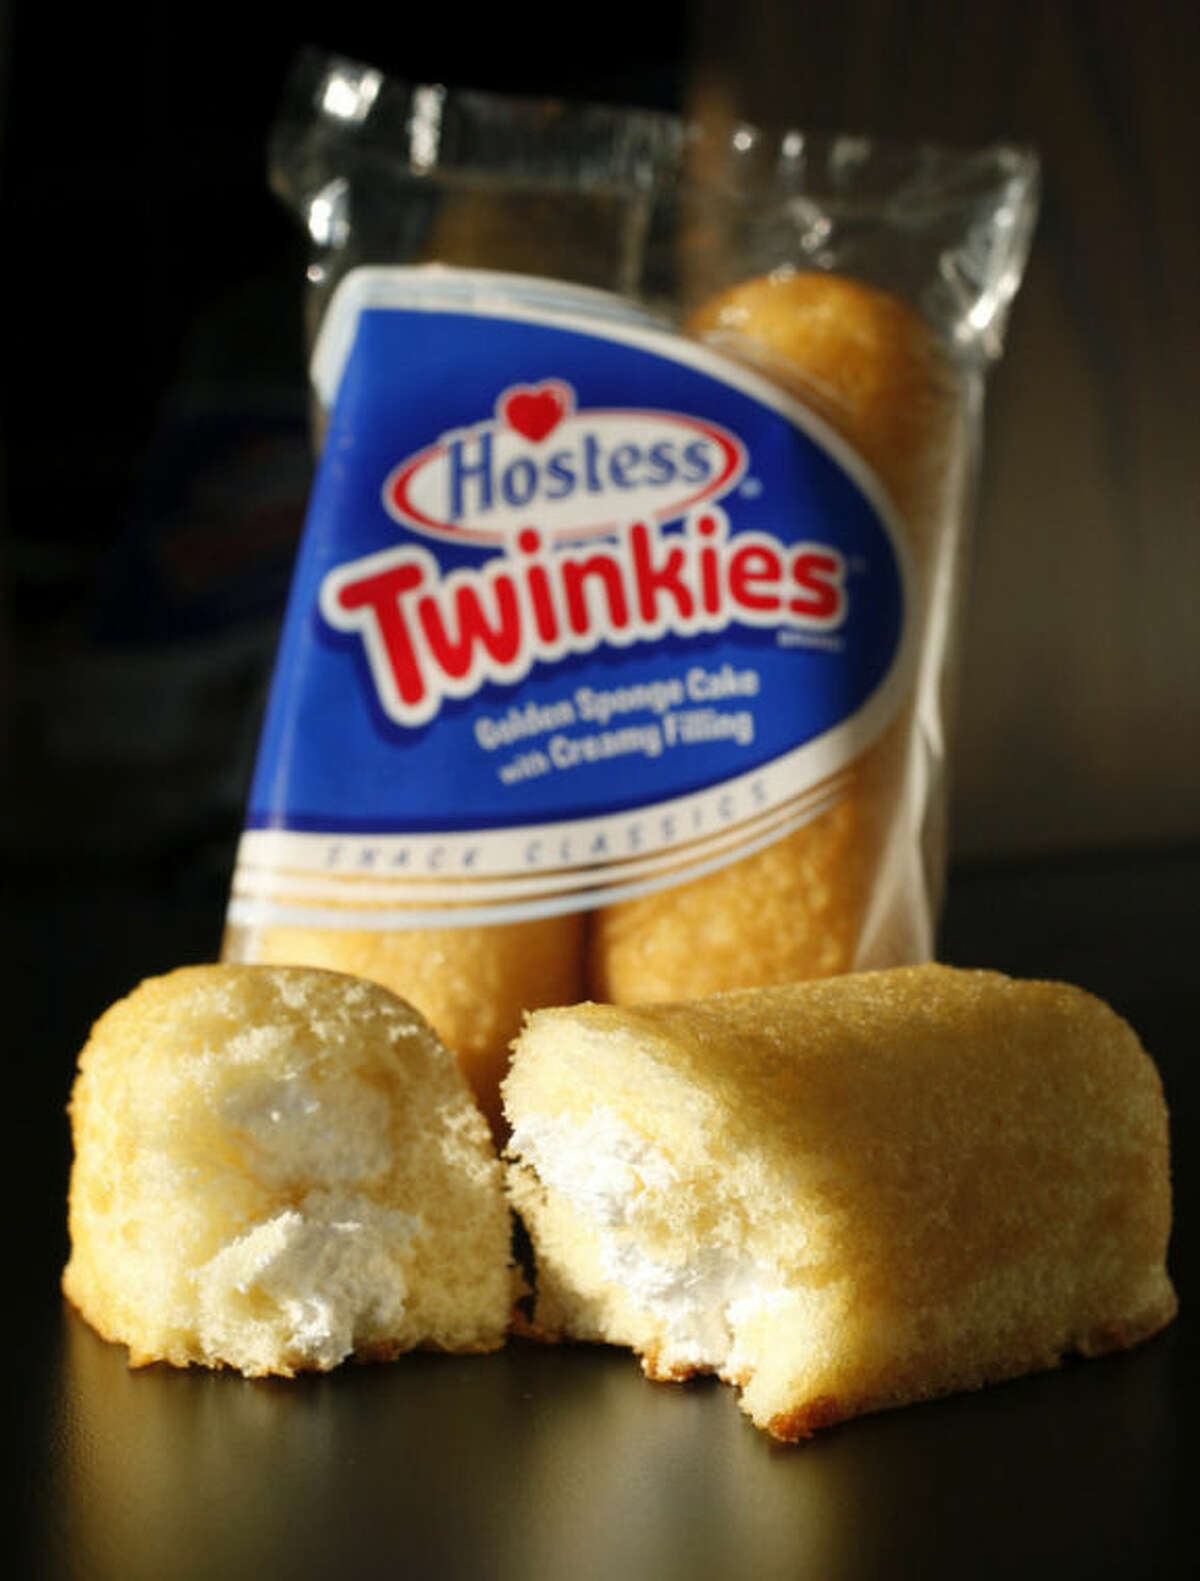 FILE - A Jan. 20, 2012, file photo shows Hostess Twinkies in a studio photograph made in New York. Hostess Brands LLC says the spongy yellow cakes will have a shelf life of 45 days when they start hitting stores again July 15. (AP Photo/Mark Lennihan)